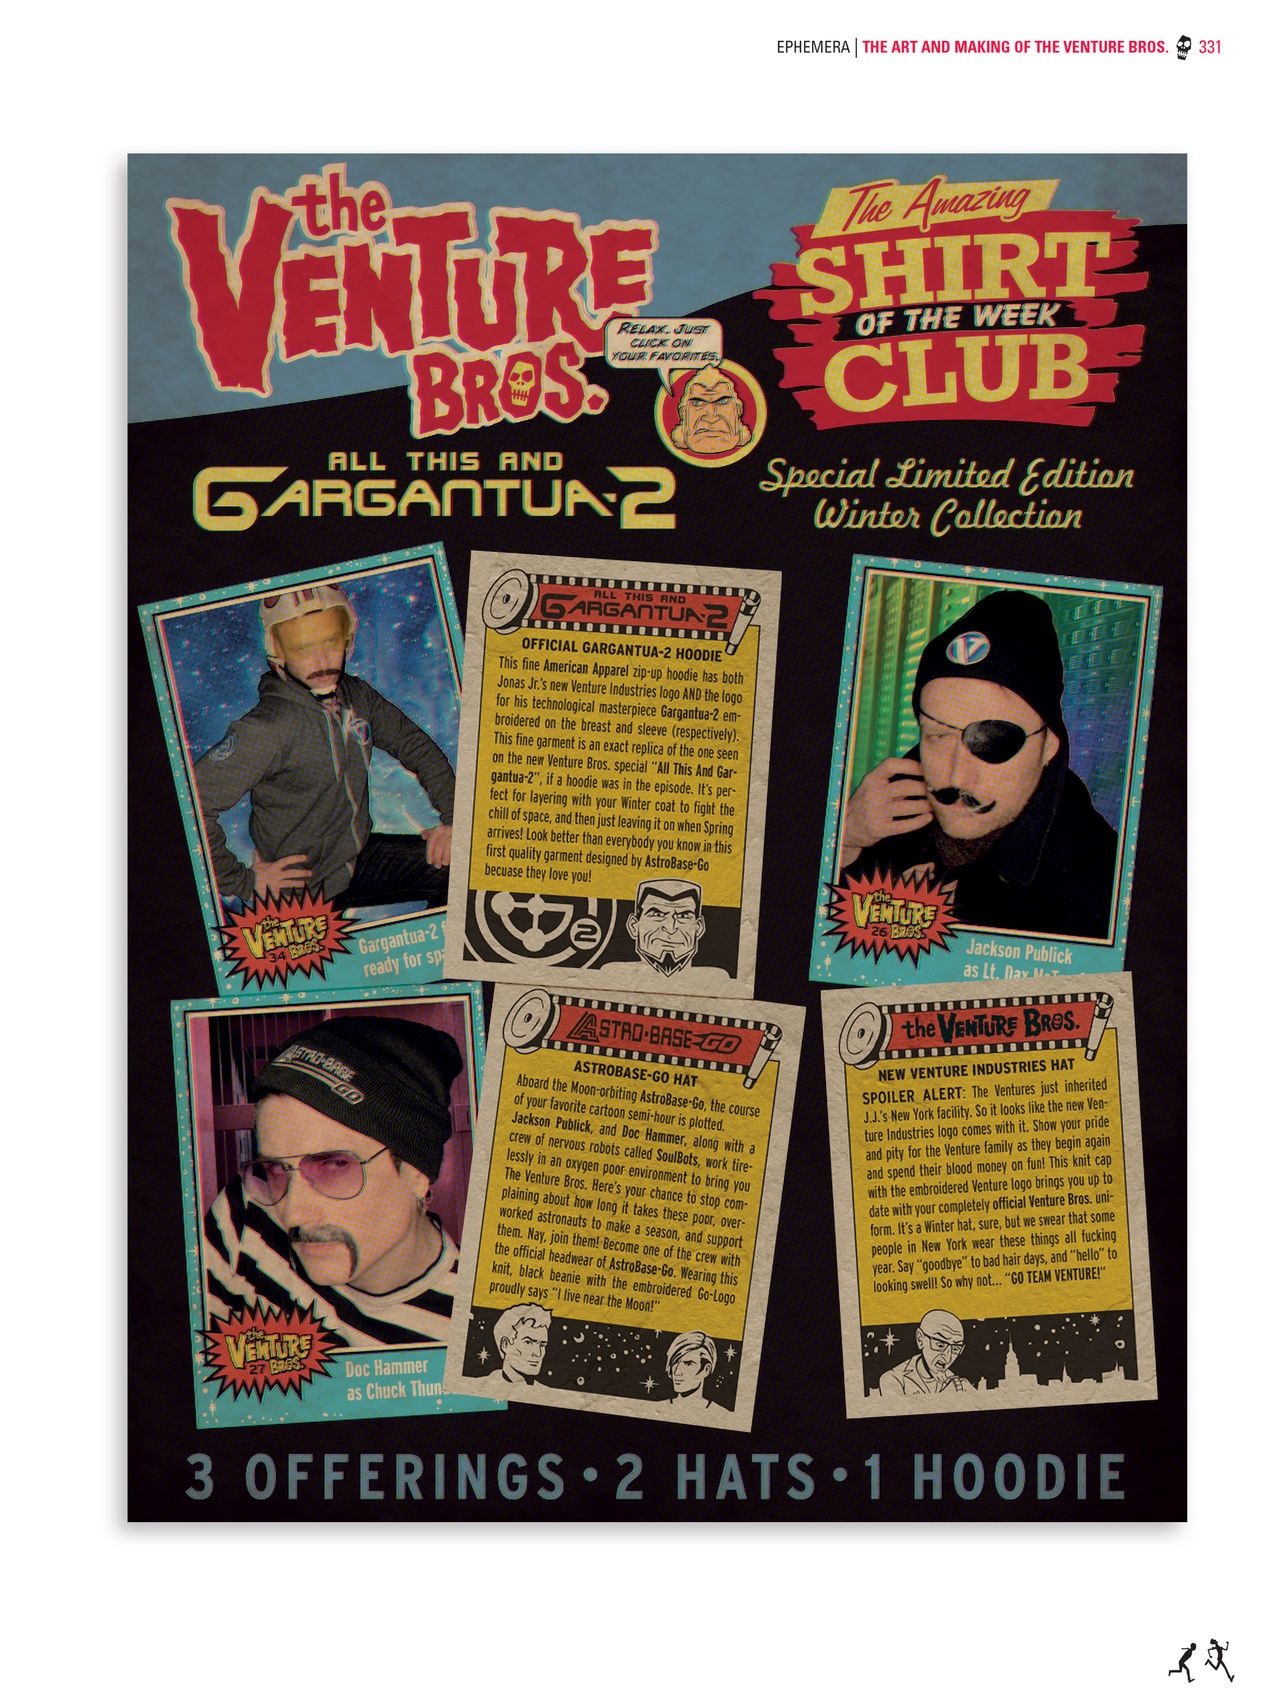 Go Team Venture! - The Art and Making of the Venture Bros 329